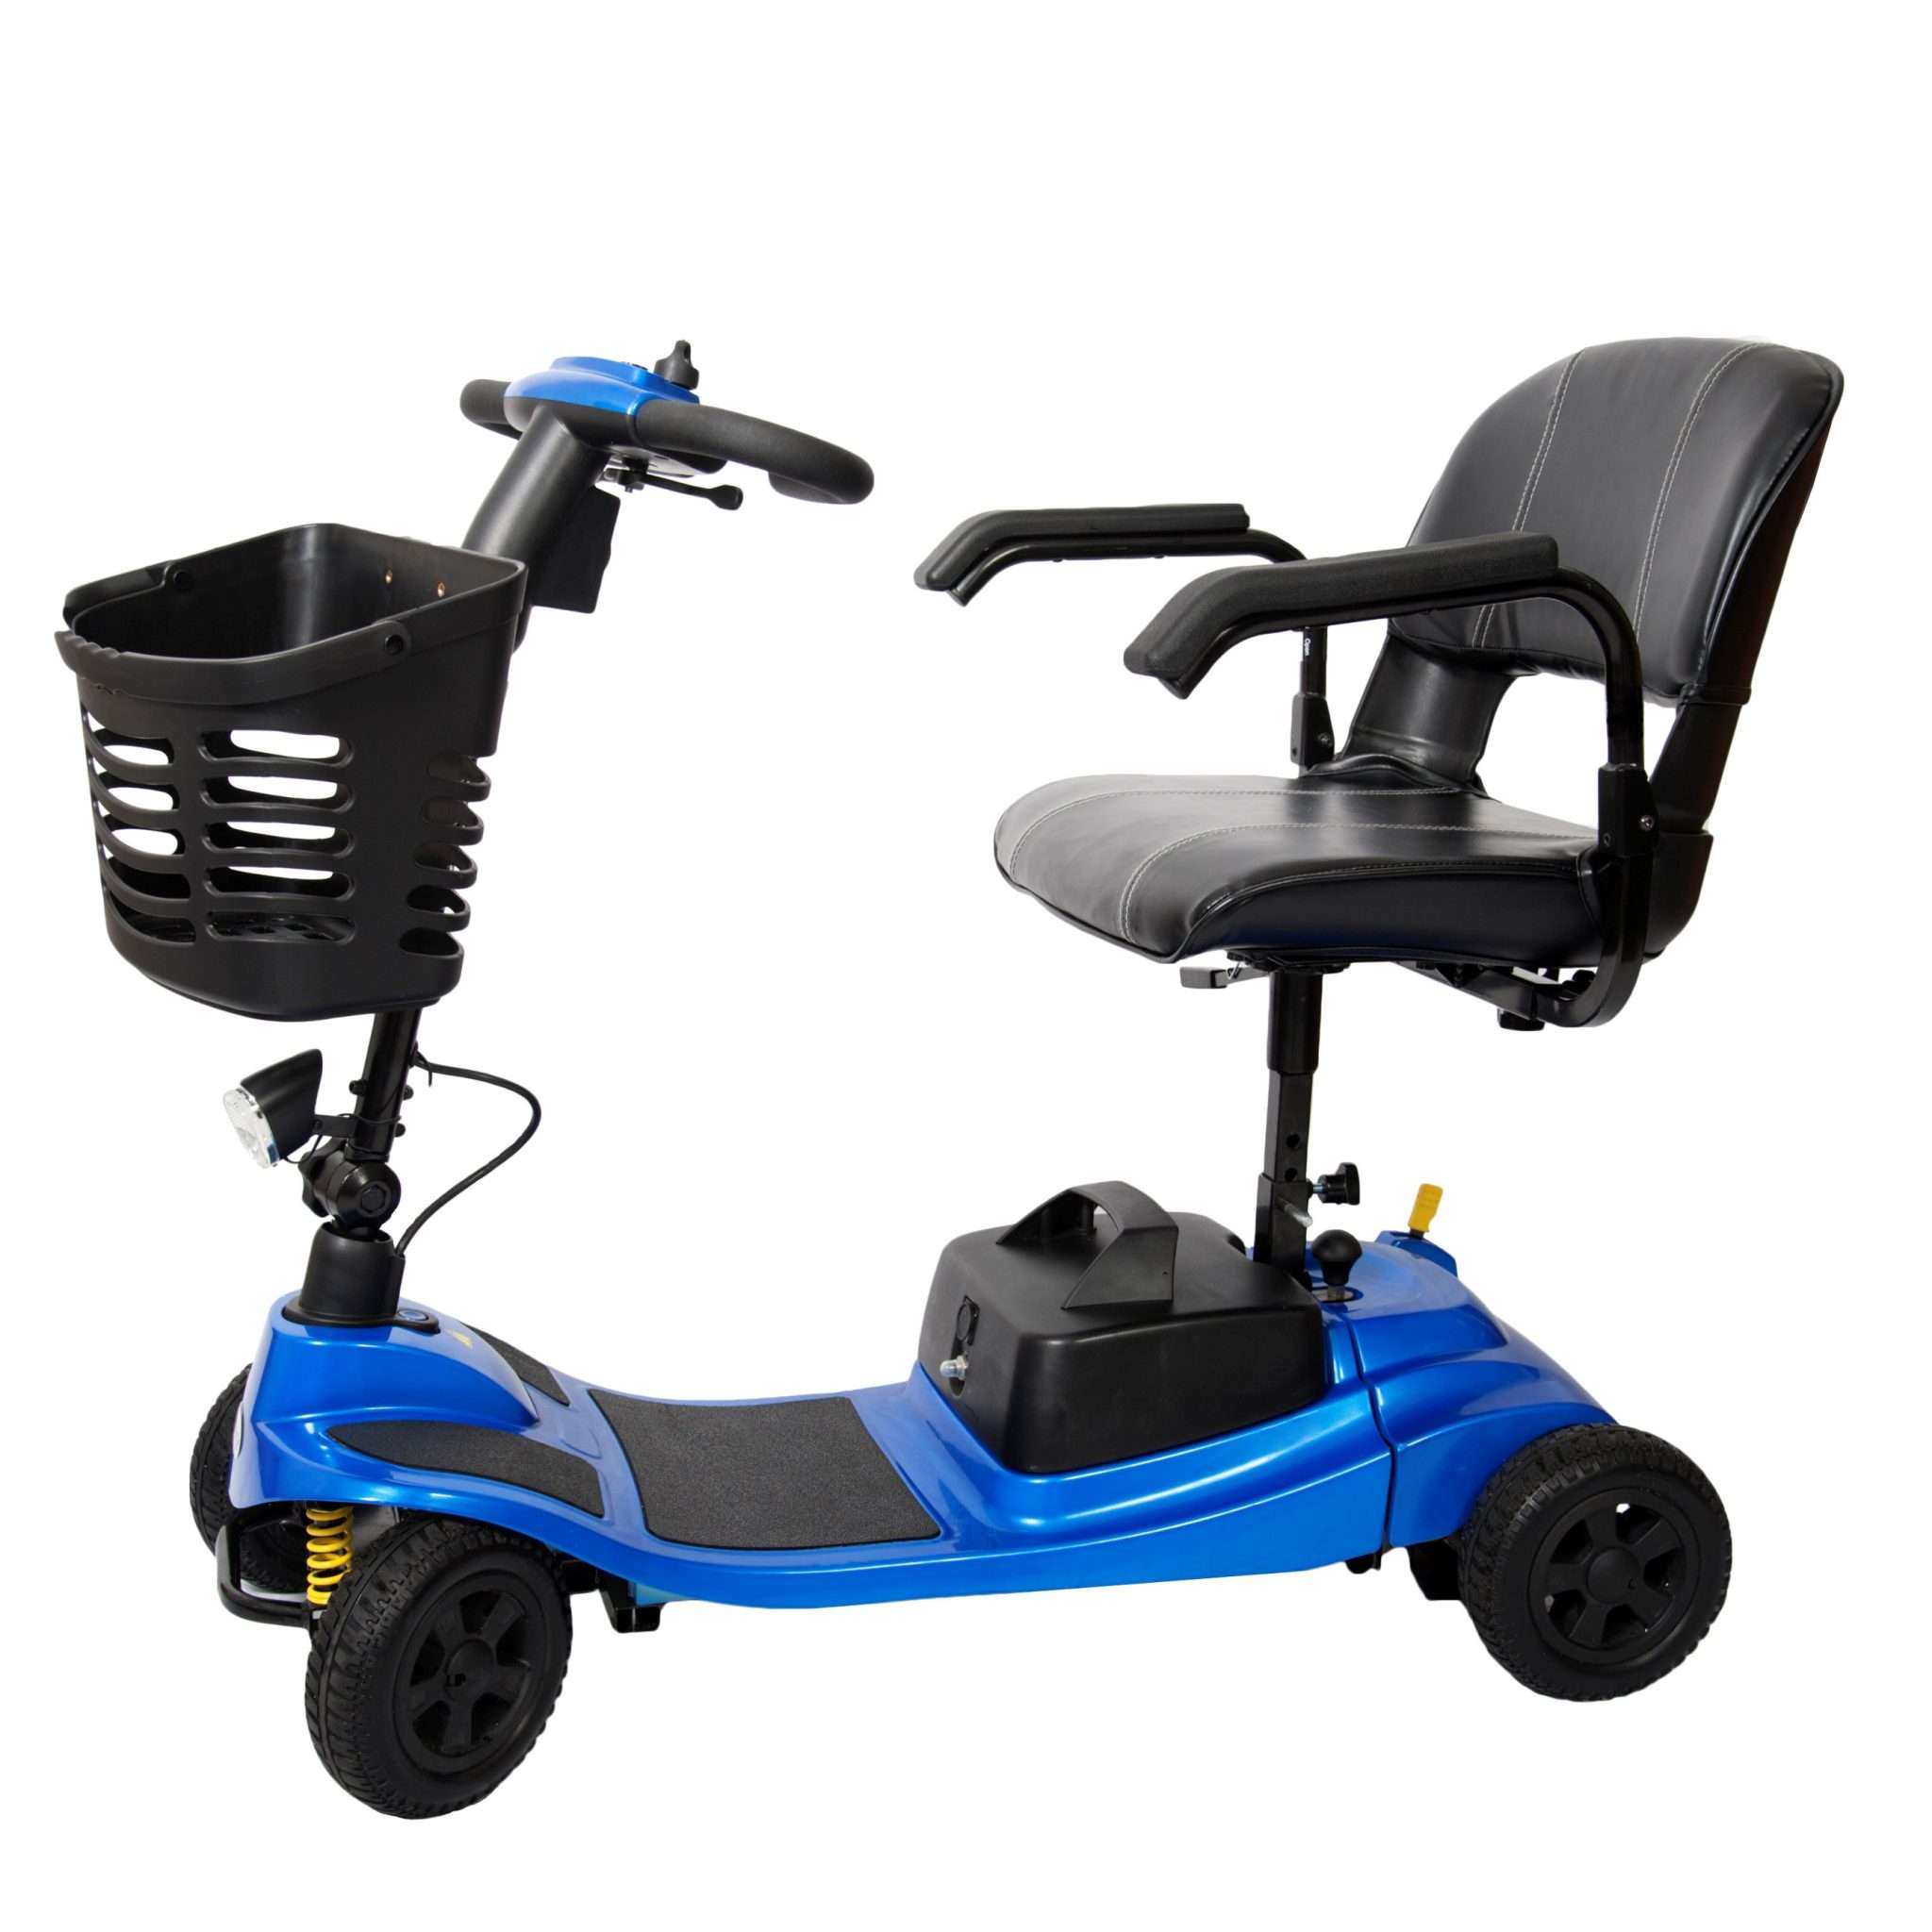 The Liberty Vogue mobility scooter in royal blue.